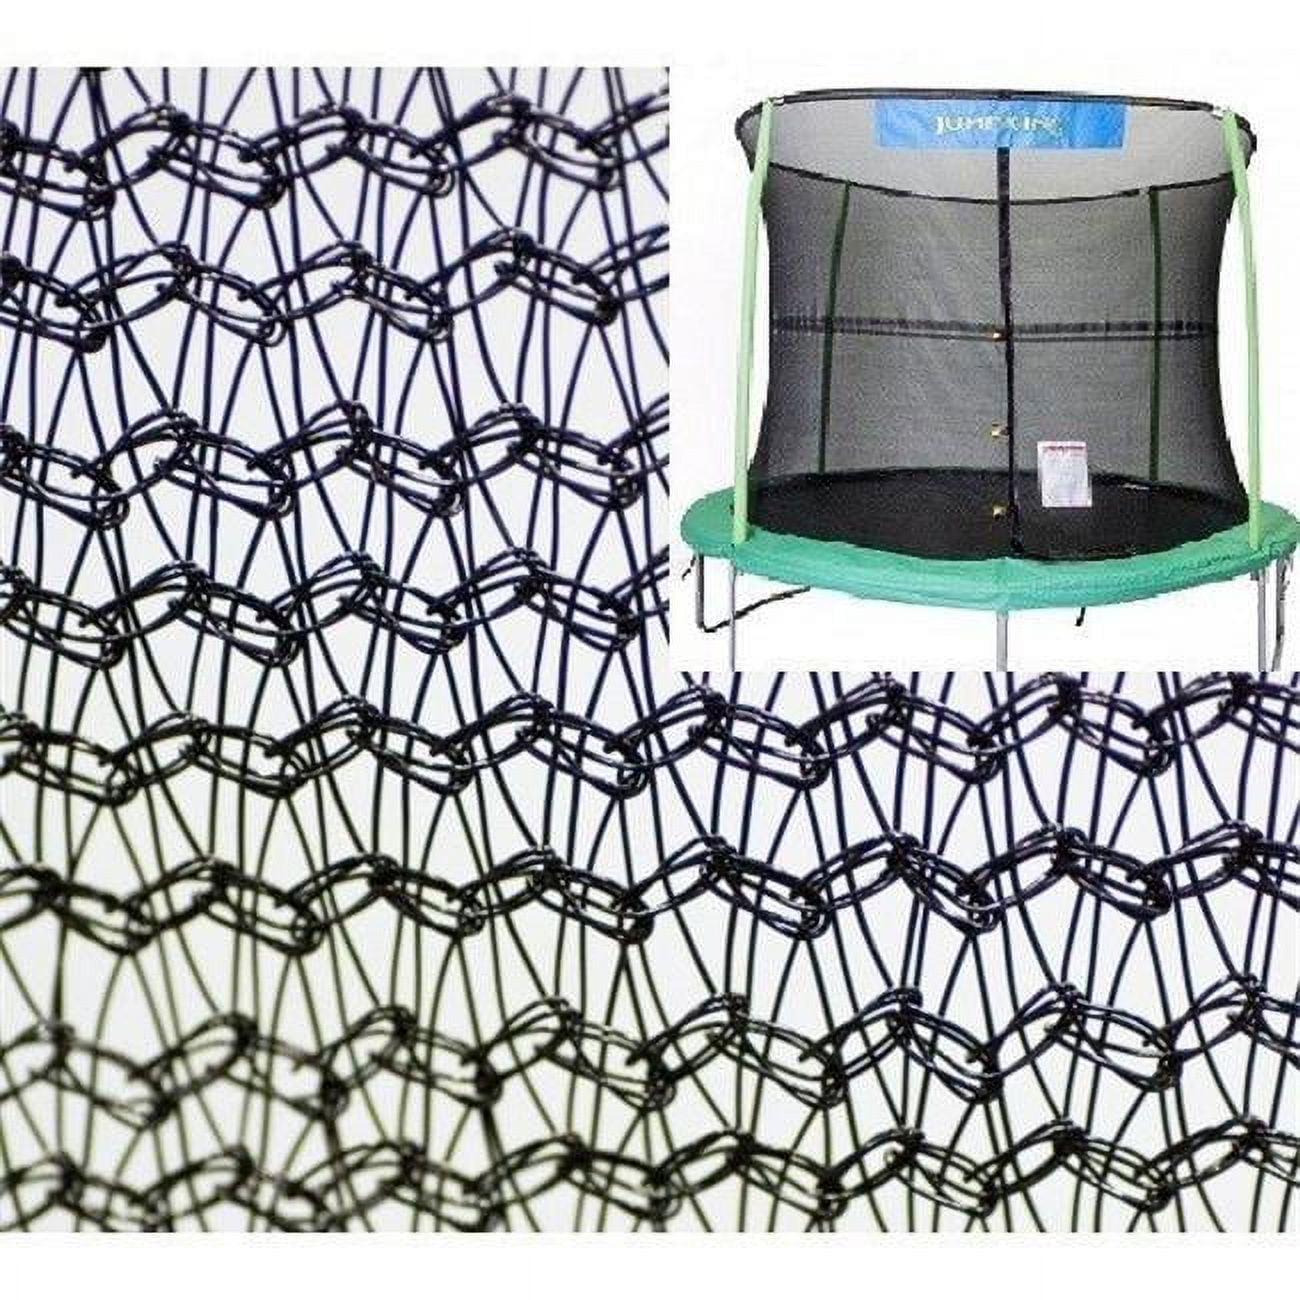 Net14-jp4-7jk 14 Ft. Enclosure Netting With 4 Poles & 7 In. Springs With Jump King Logo